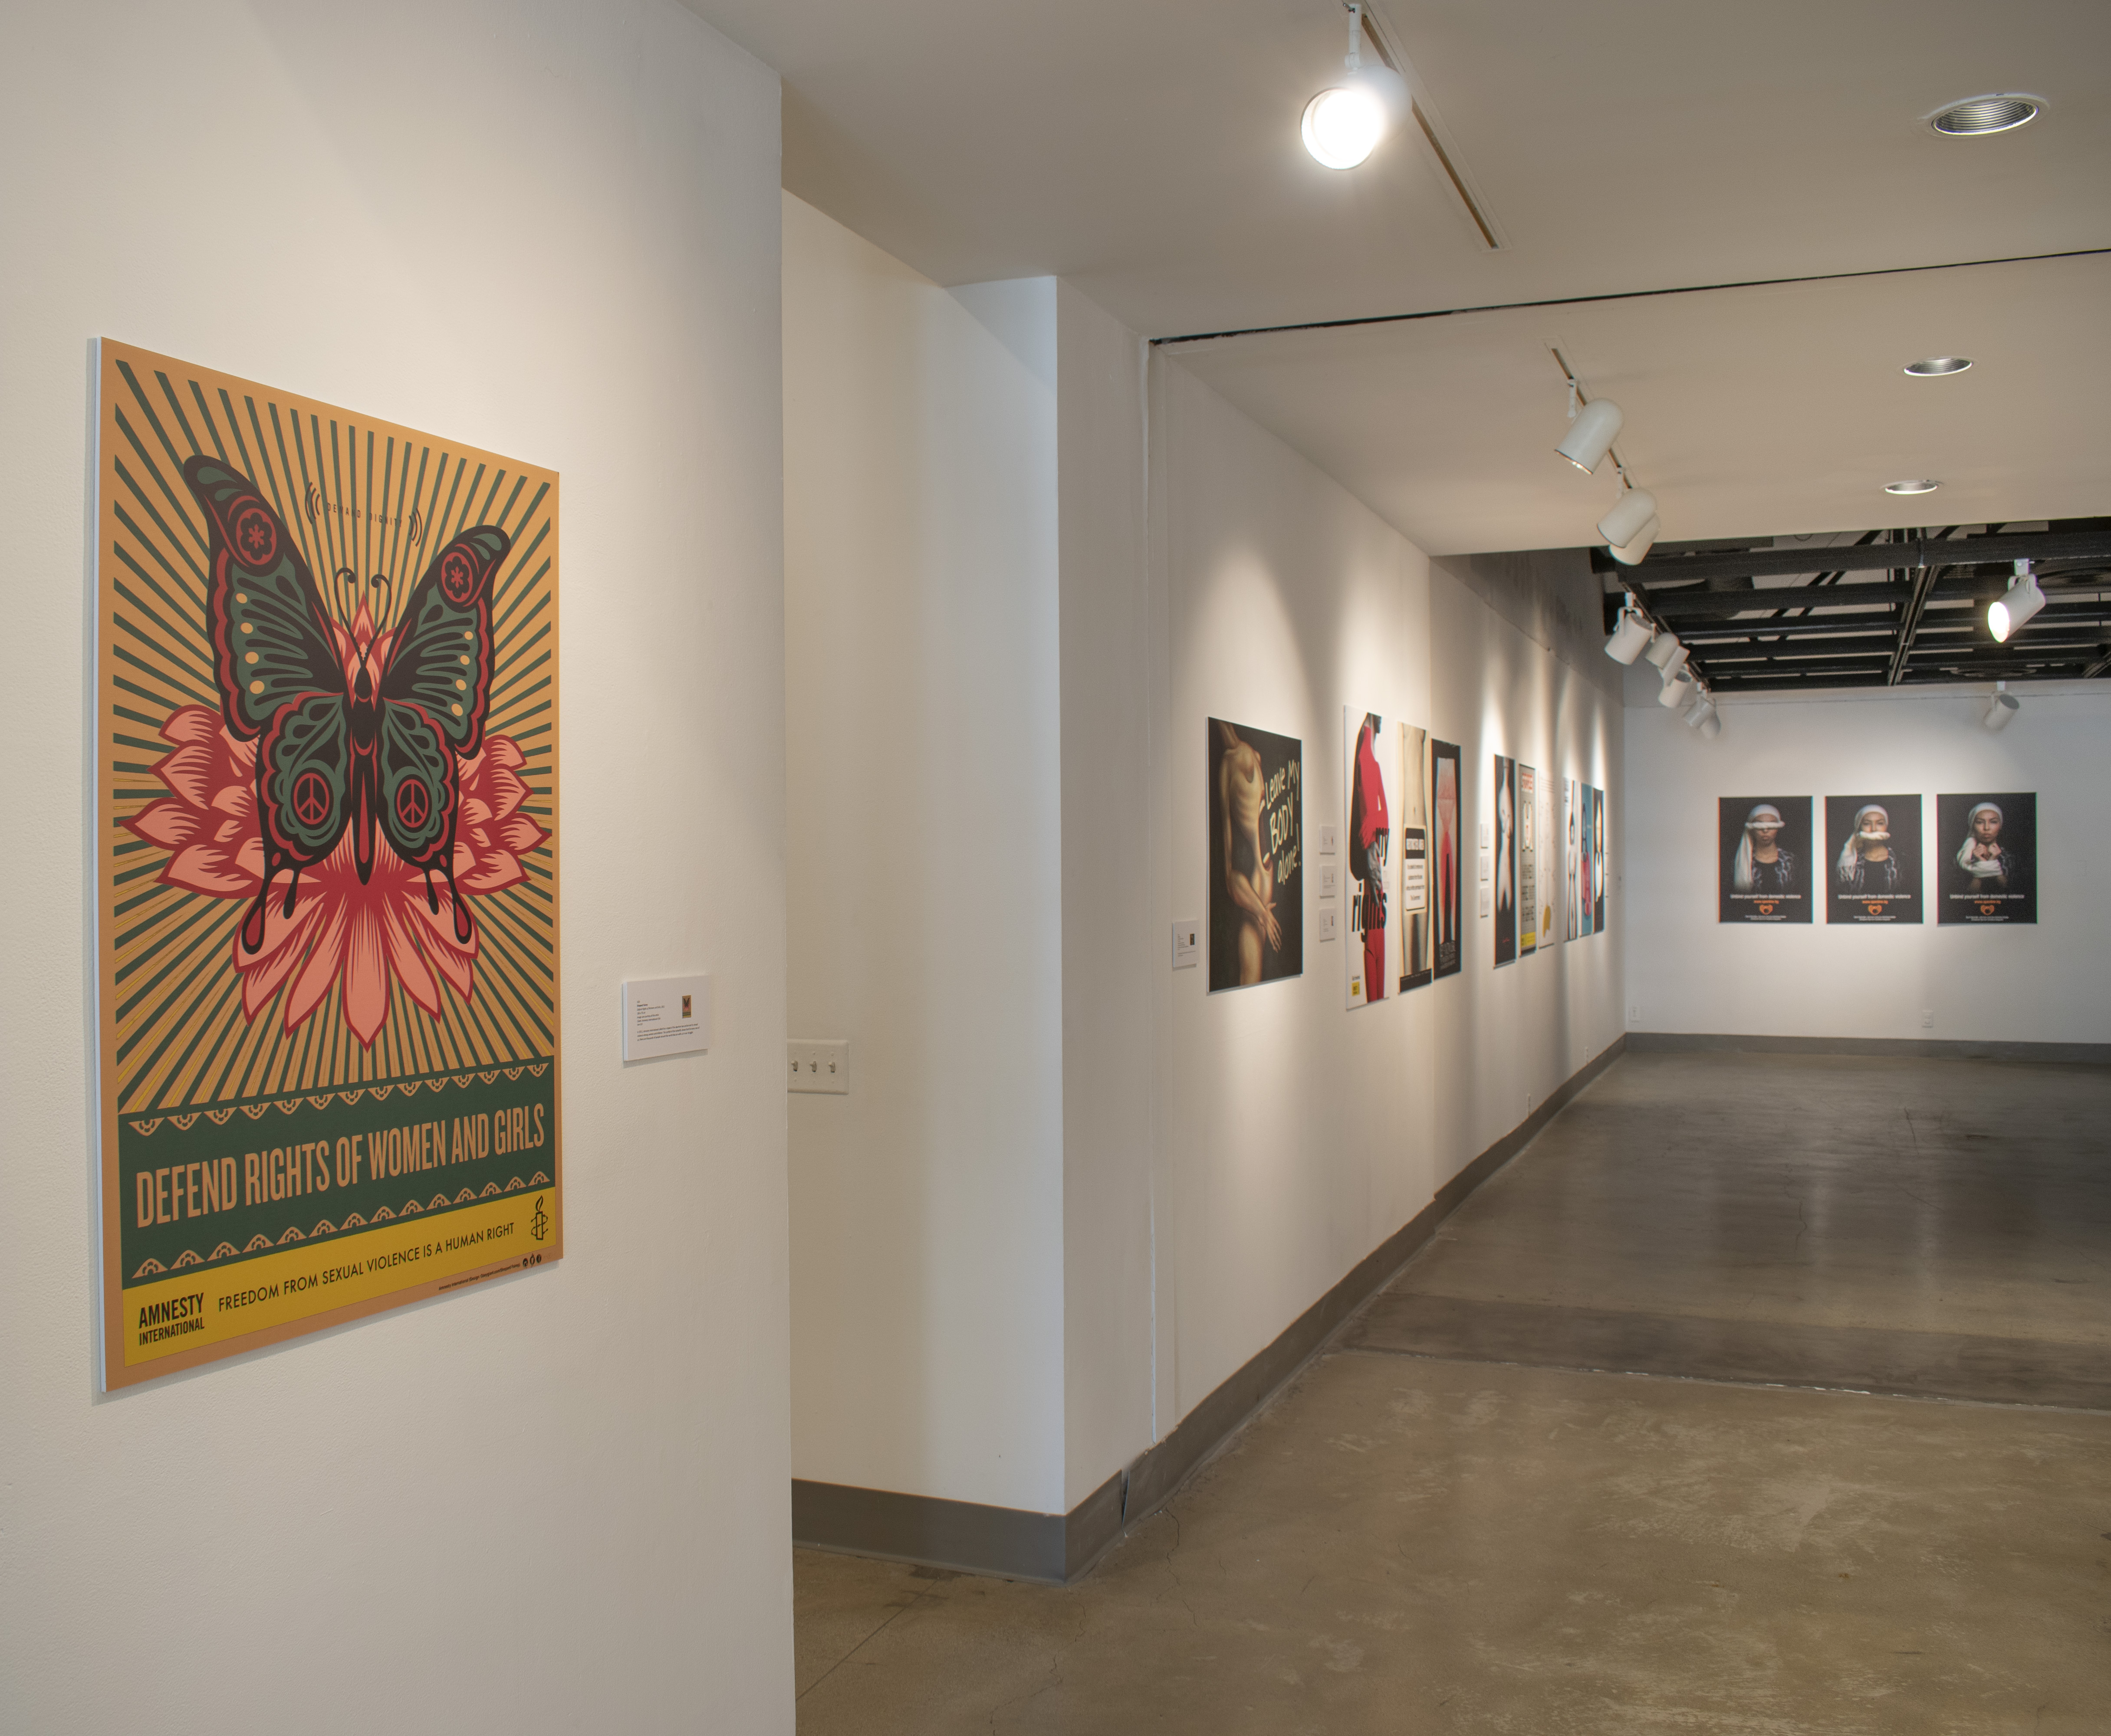 Installation View, Corridor Gallery, Women's Rights are Human Rights Exhibition, Sept 15, 2021 to Dec 1, 2021